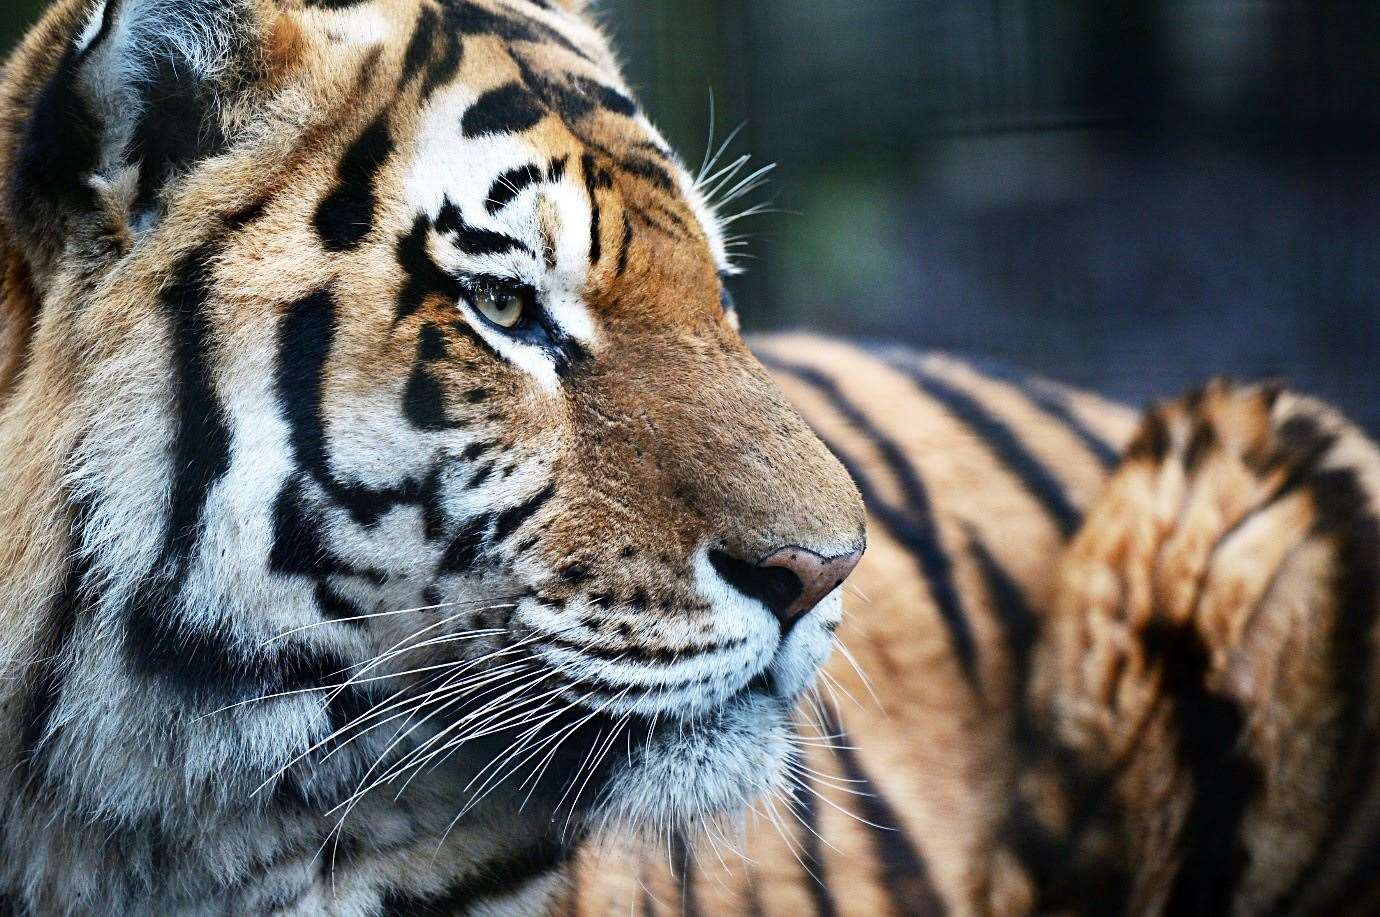 There are just 500 Amur tigers in the wild.